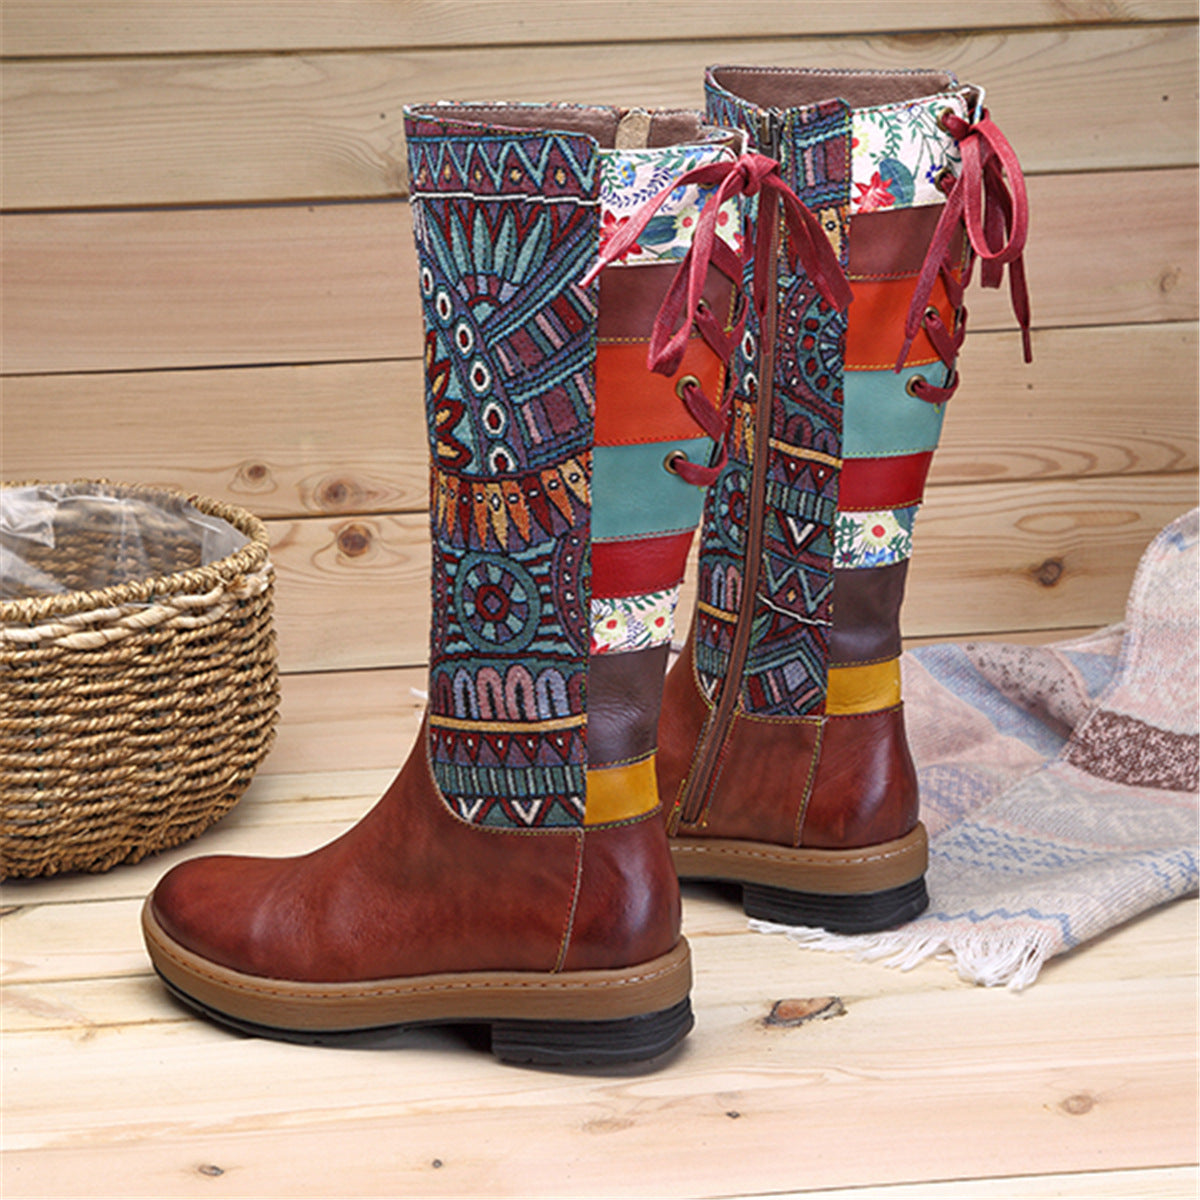 Vintage Mid-calf Boots Women Shoes Bohemian Retro Genuine Leather Motorcycle Boots Printed Side Zipper Back Lace Up Botas